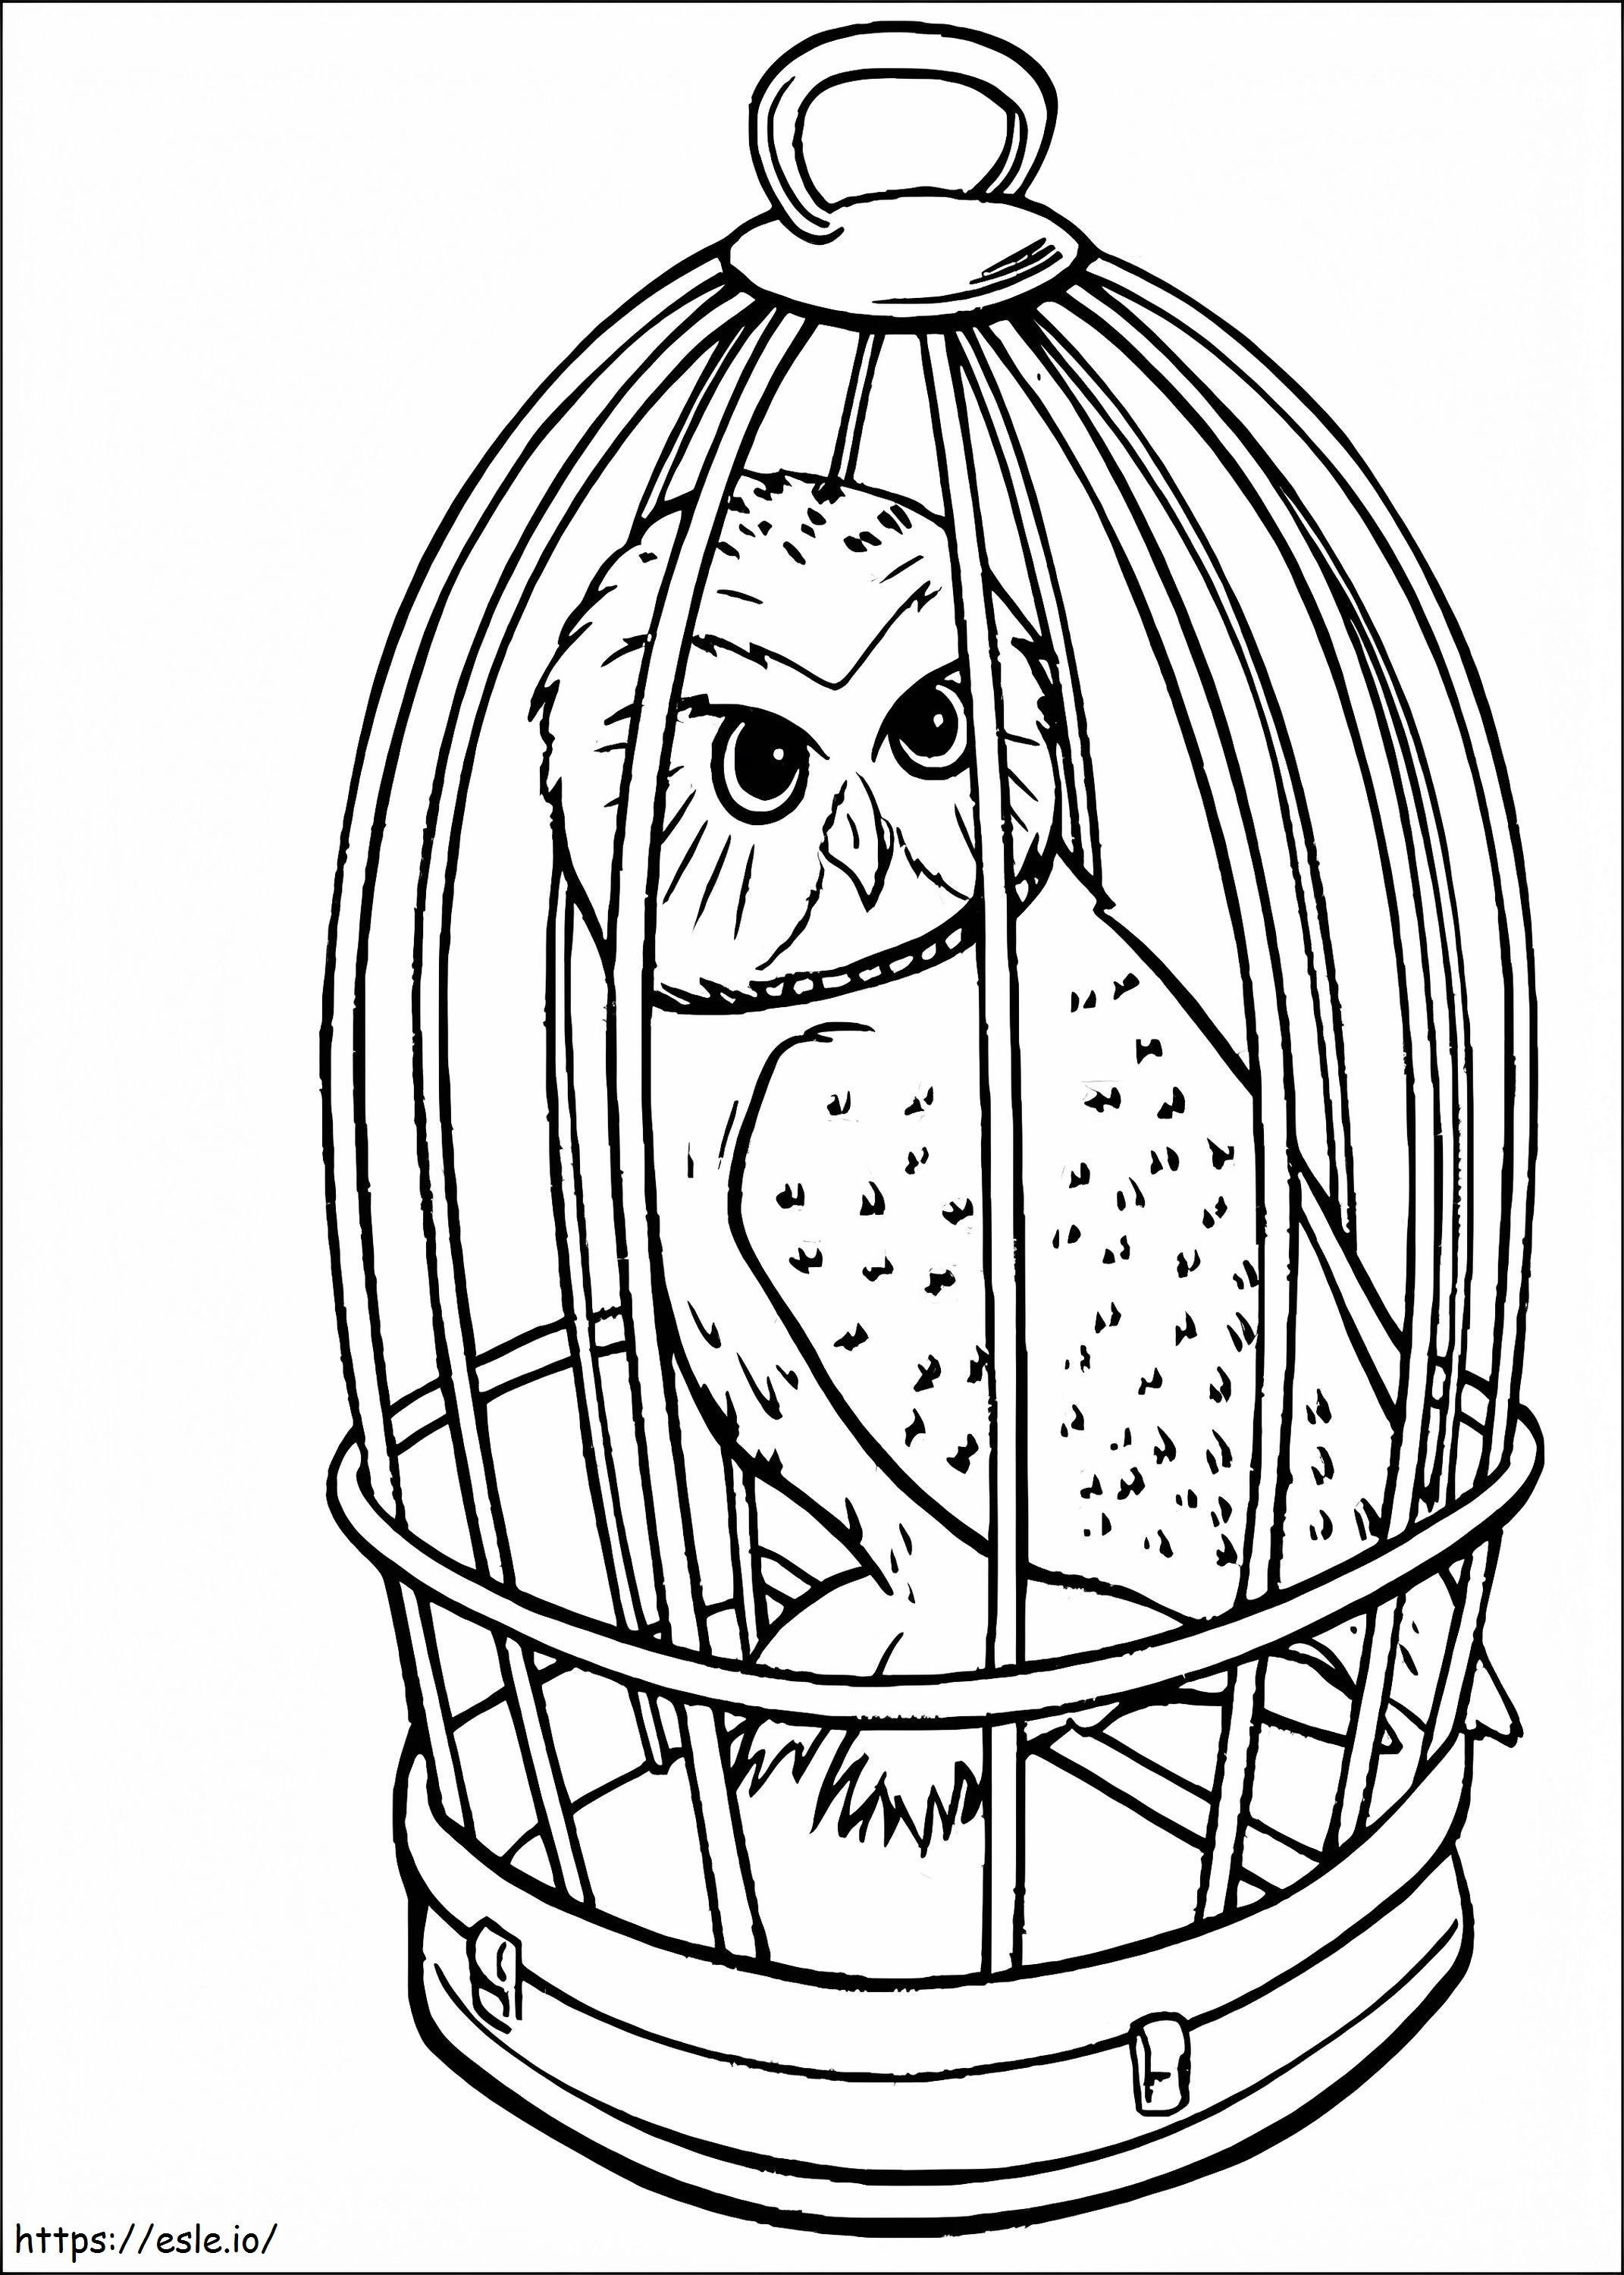 Hedwig In The Barn coloring page